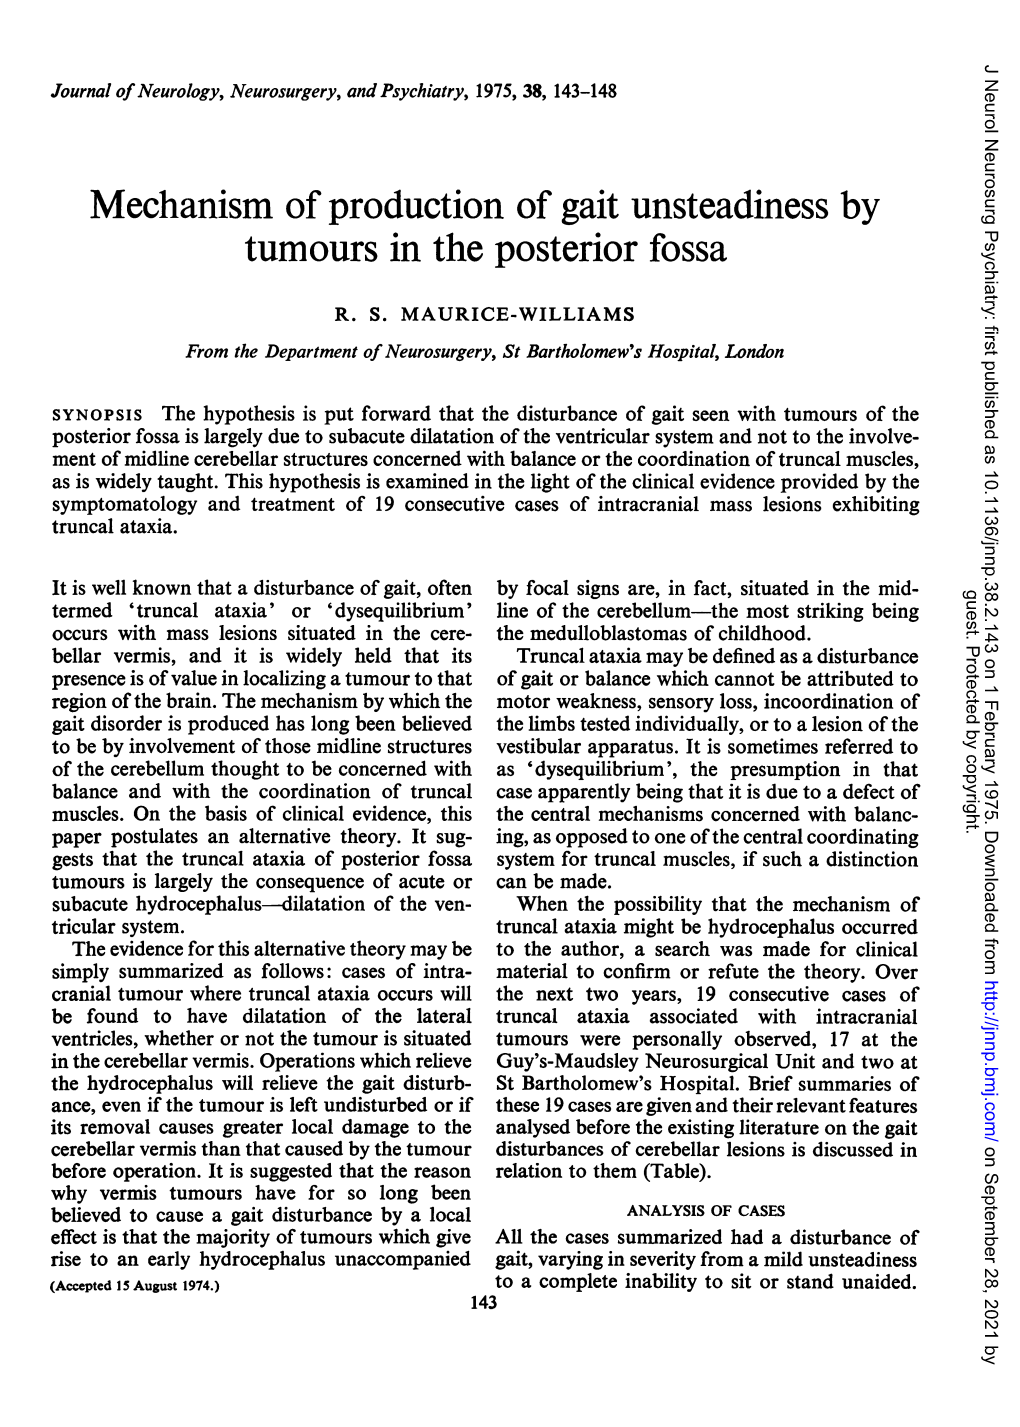 Mechanism of Production of Gait Unsteadiness by Tumours in the Posterior Fossa